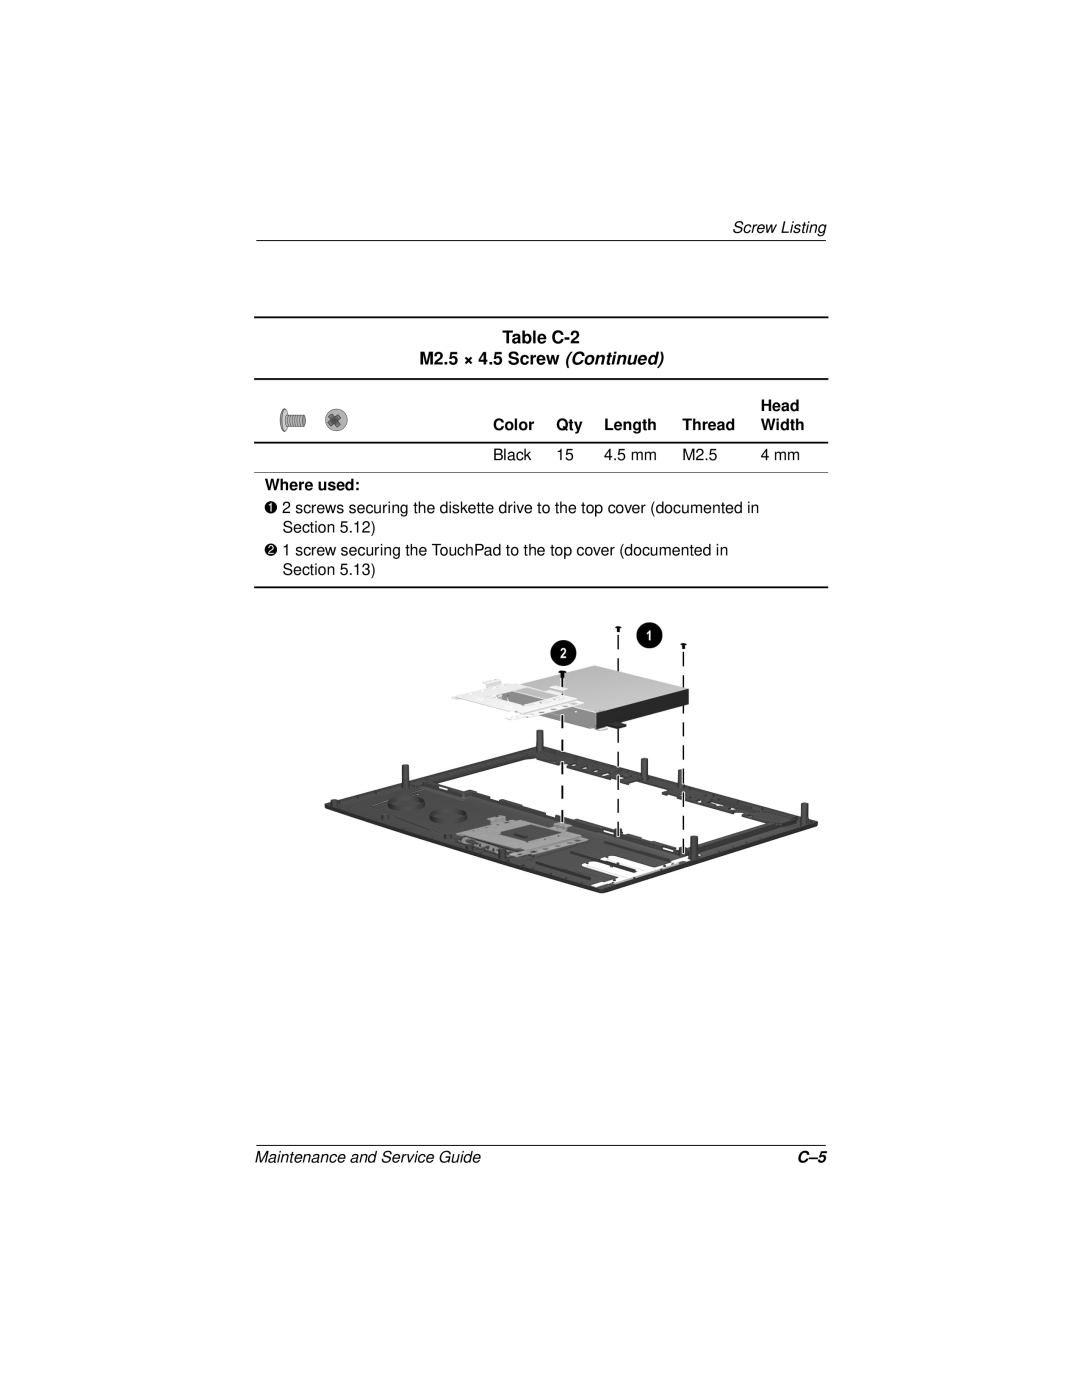 Compaq N110 manual Table C-2 M2.5 × 4.5 Screw Continued, Screw Listing, Maintenance and Service Guide 